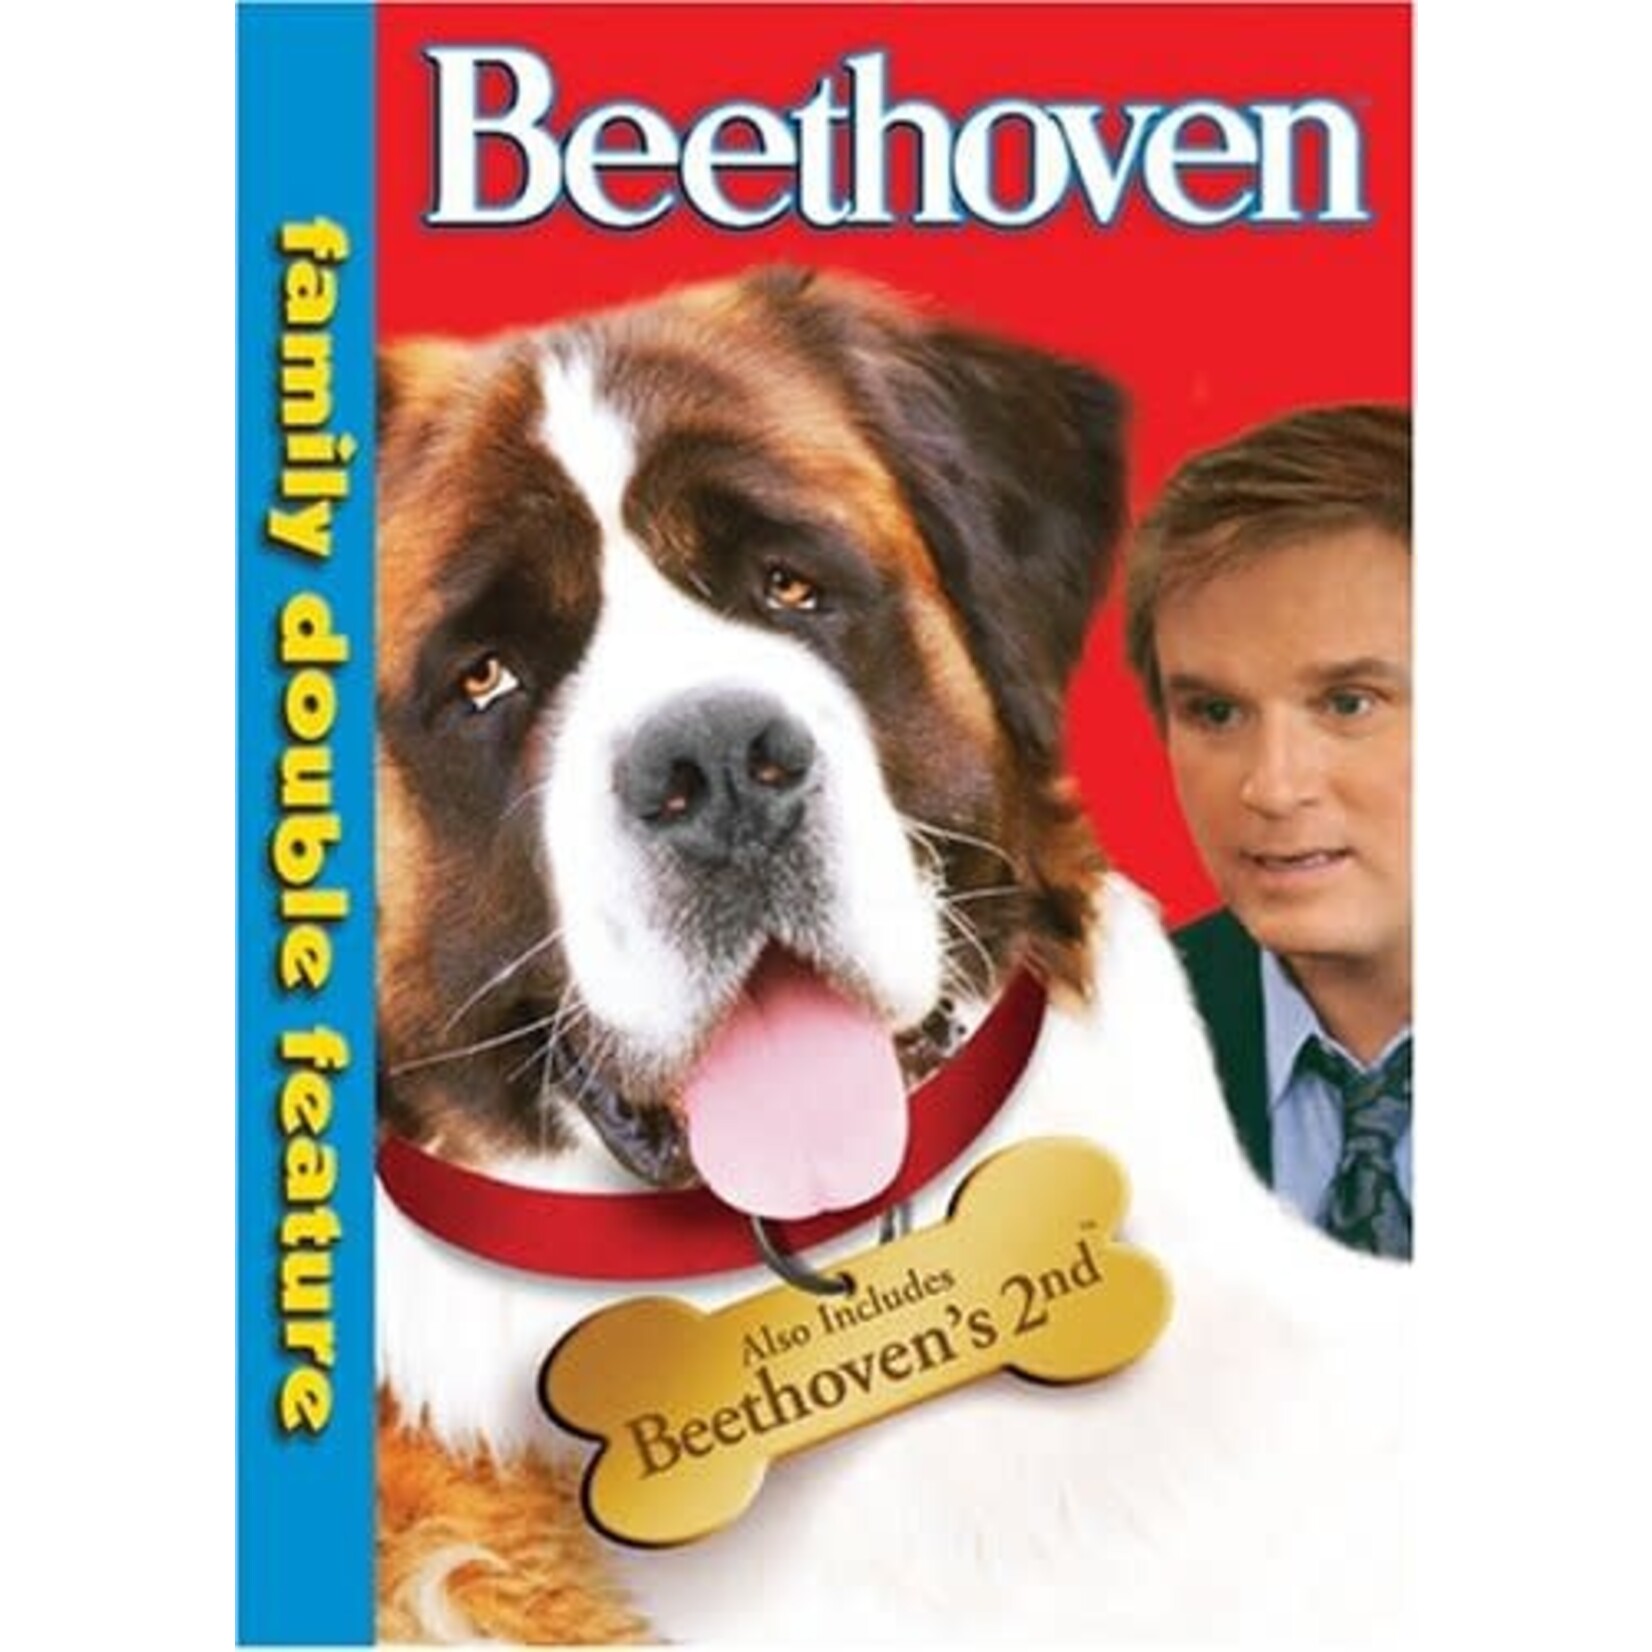 Beethoven/Beethoven 2: Beethoven's 2nd - Family Double Feature [USED DVD]